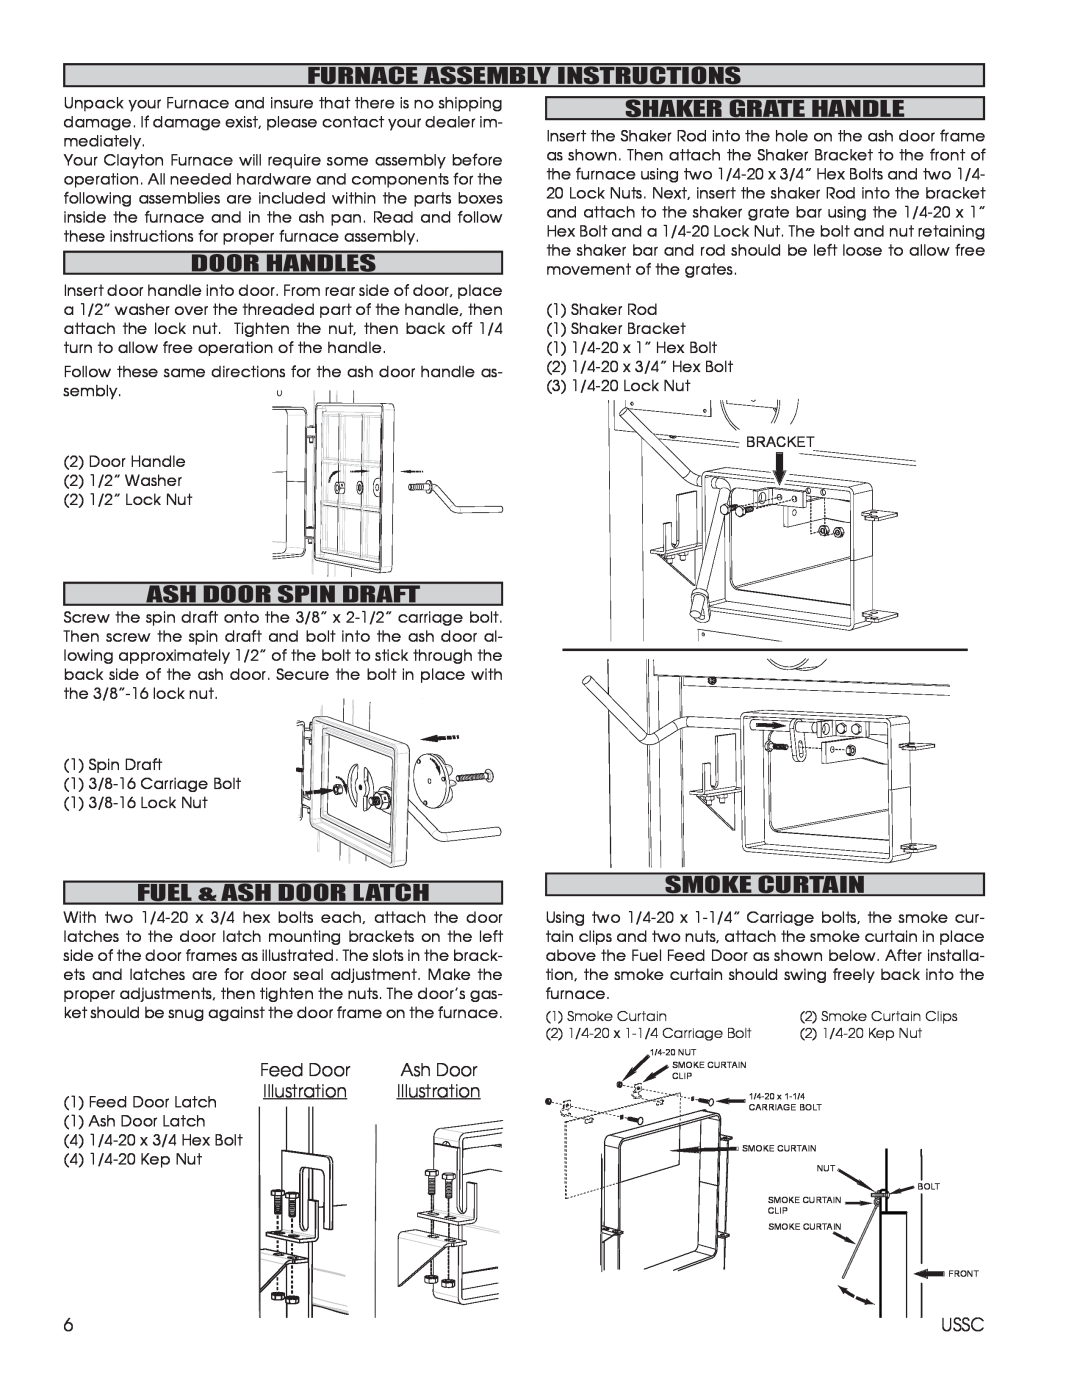 United States Stove 1802G, 1602G Furnace Assembly Instructions, Shaker Grate Handle, Door Handles, Ash Door Spin Draft 